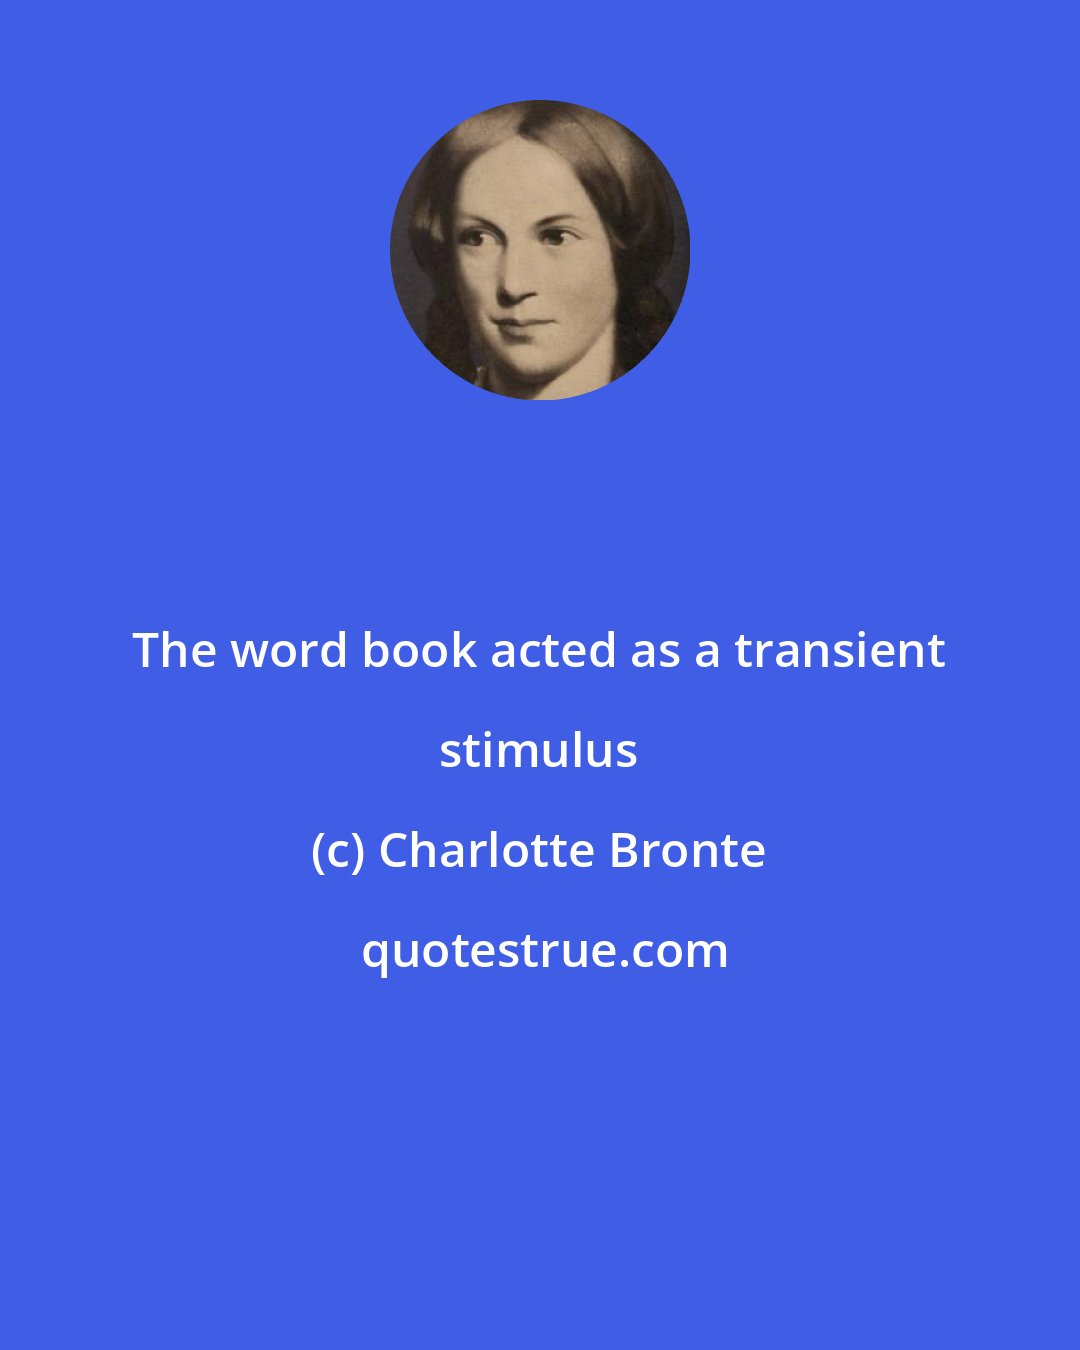 Charlotte Bronte: The word book acted as a transient stimulus